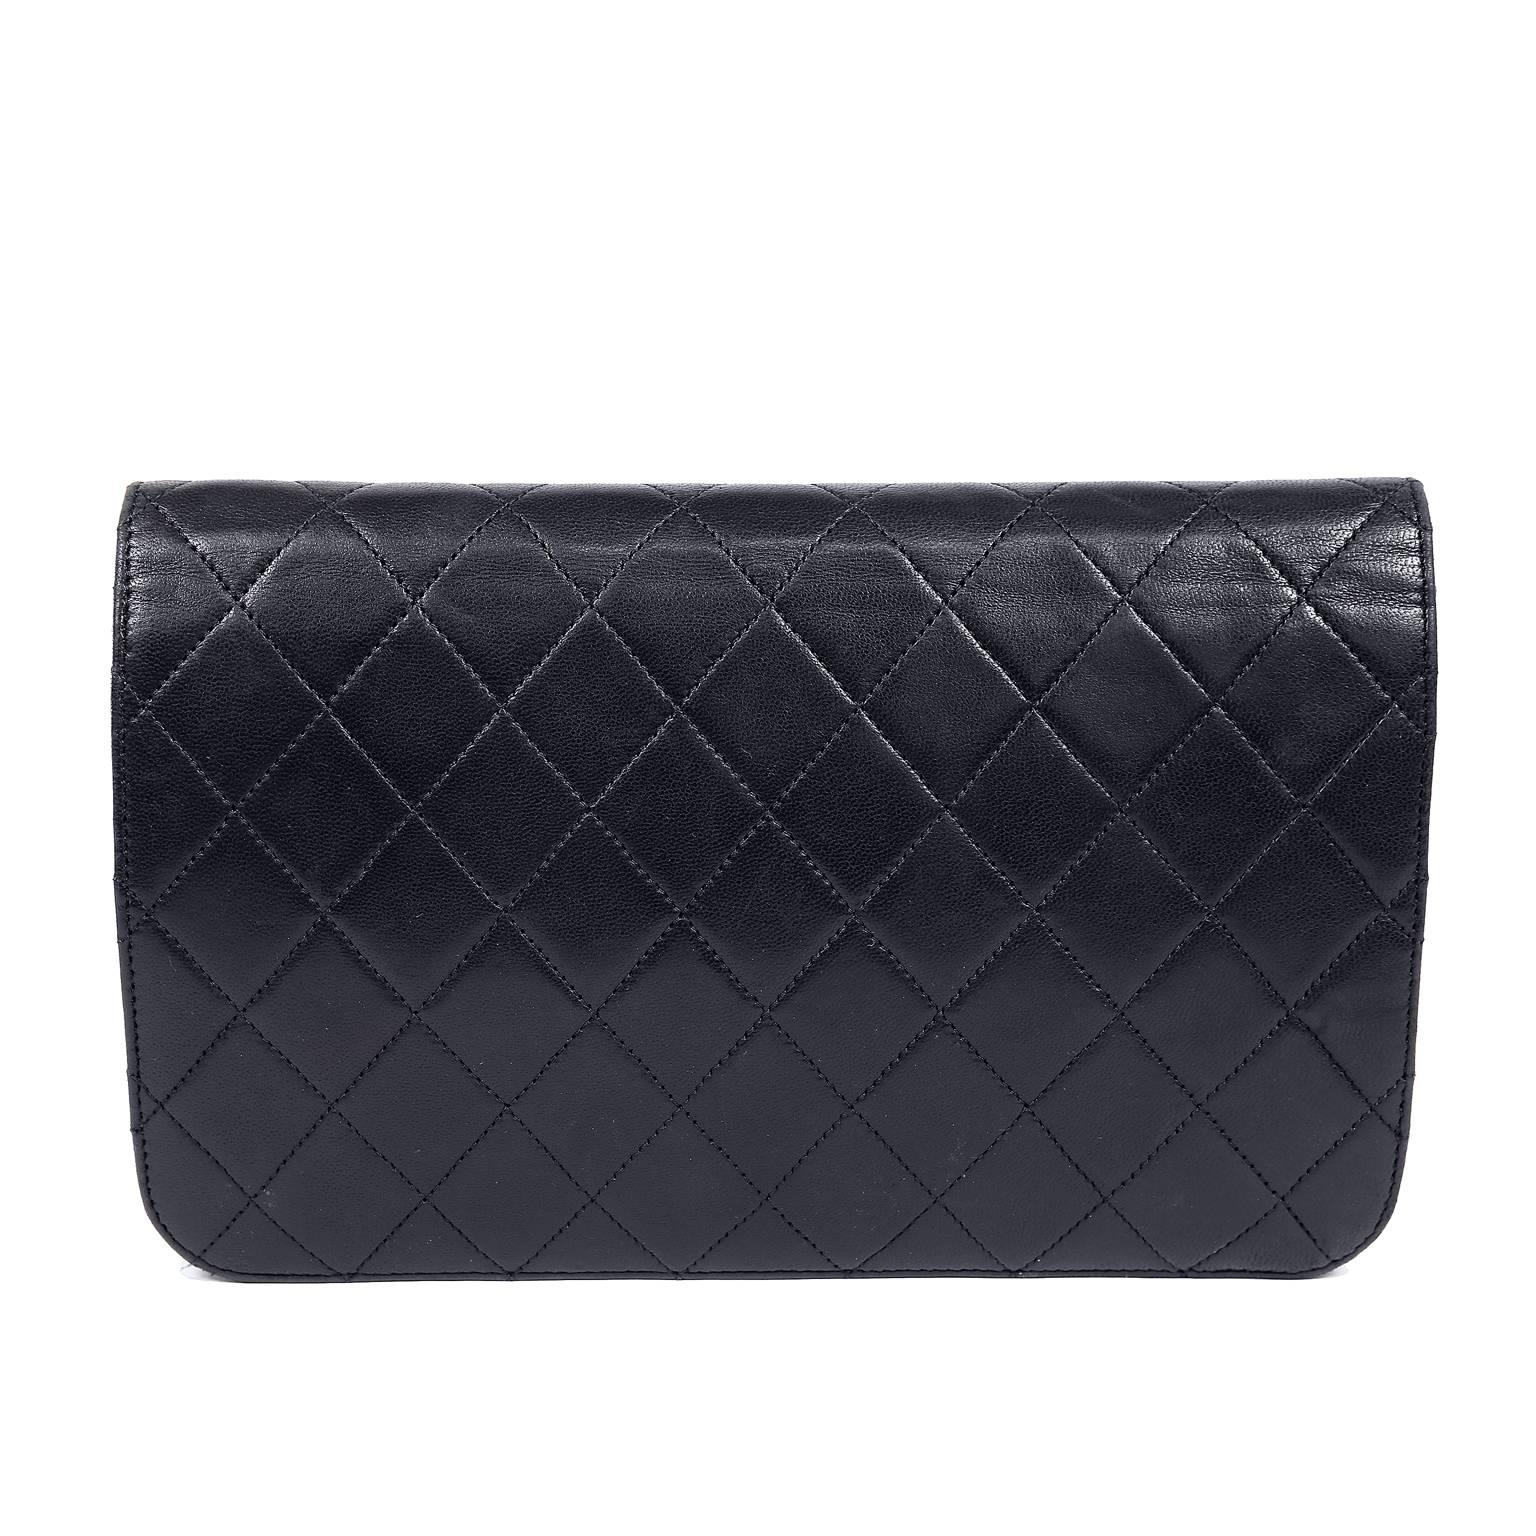 Chanel Black Leather Large Vintage Clutch with Strap- MINT Condition
Black leather large clutch is quilted in signature Chanel diamond pattern.  Gold interlocking CC conceals a snap closure.  Bordeaux leather interior has one side zippered pocket. 